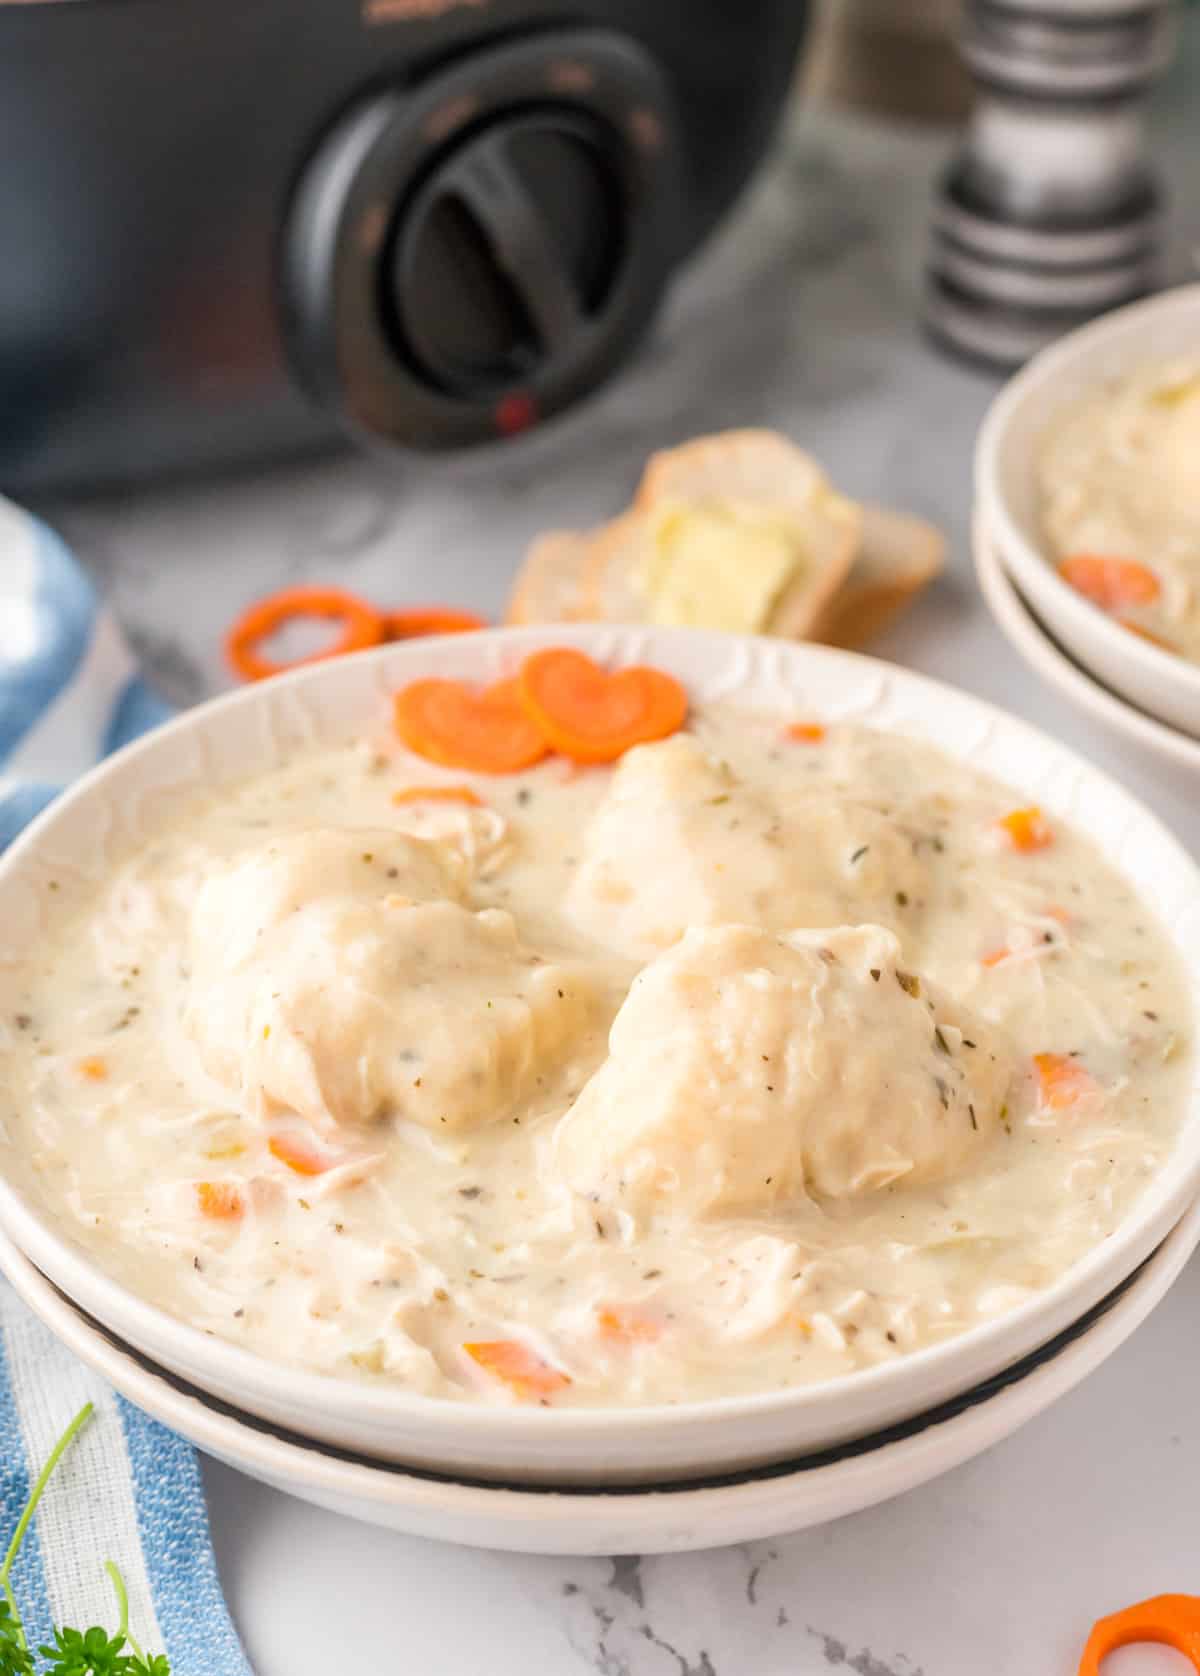 Finished Slow Cooker Chicken and Dumplings in white bowl with slow cooker in background.